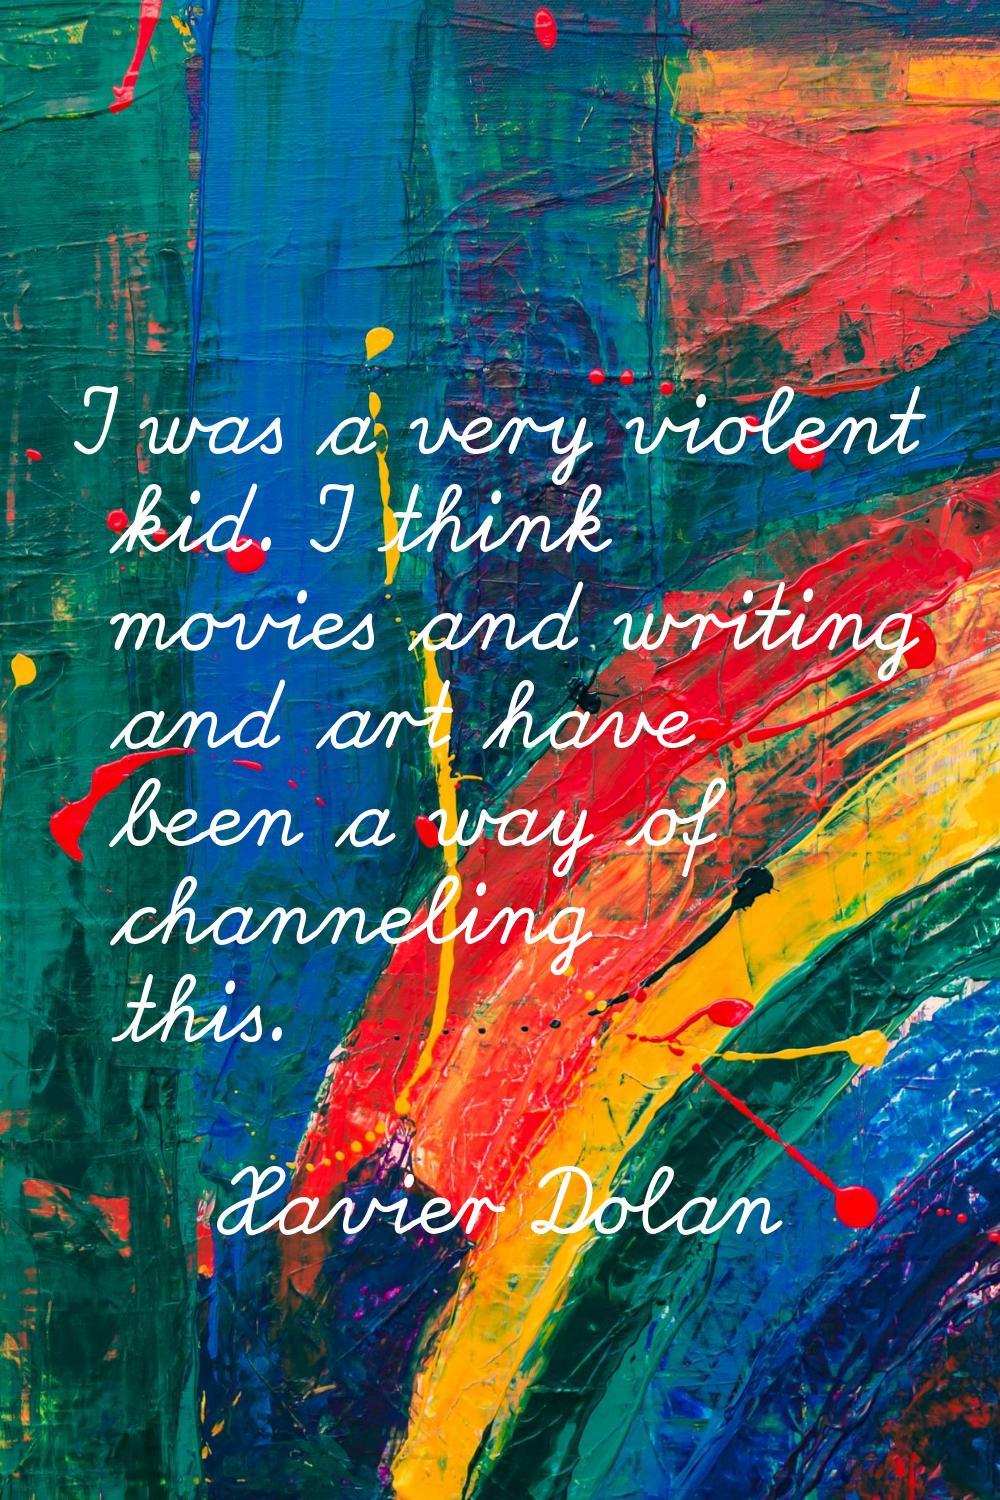 I was a very violent kid. I think movies and writing and art have been a way of channeling this.